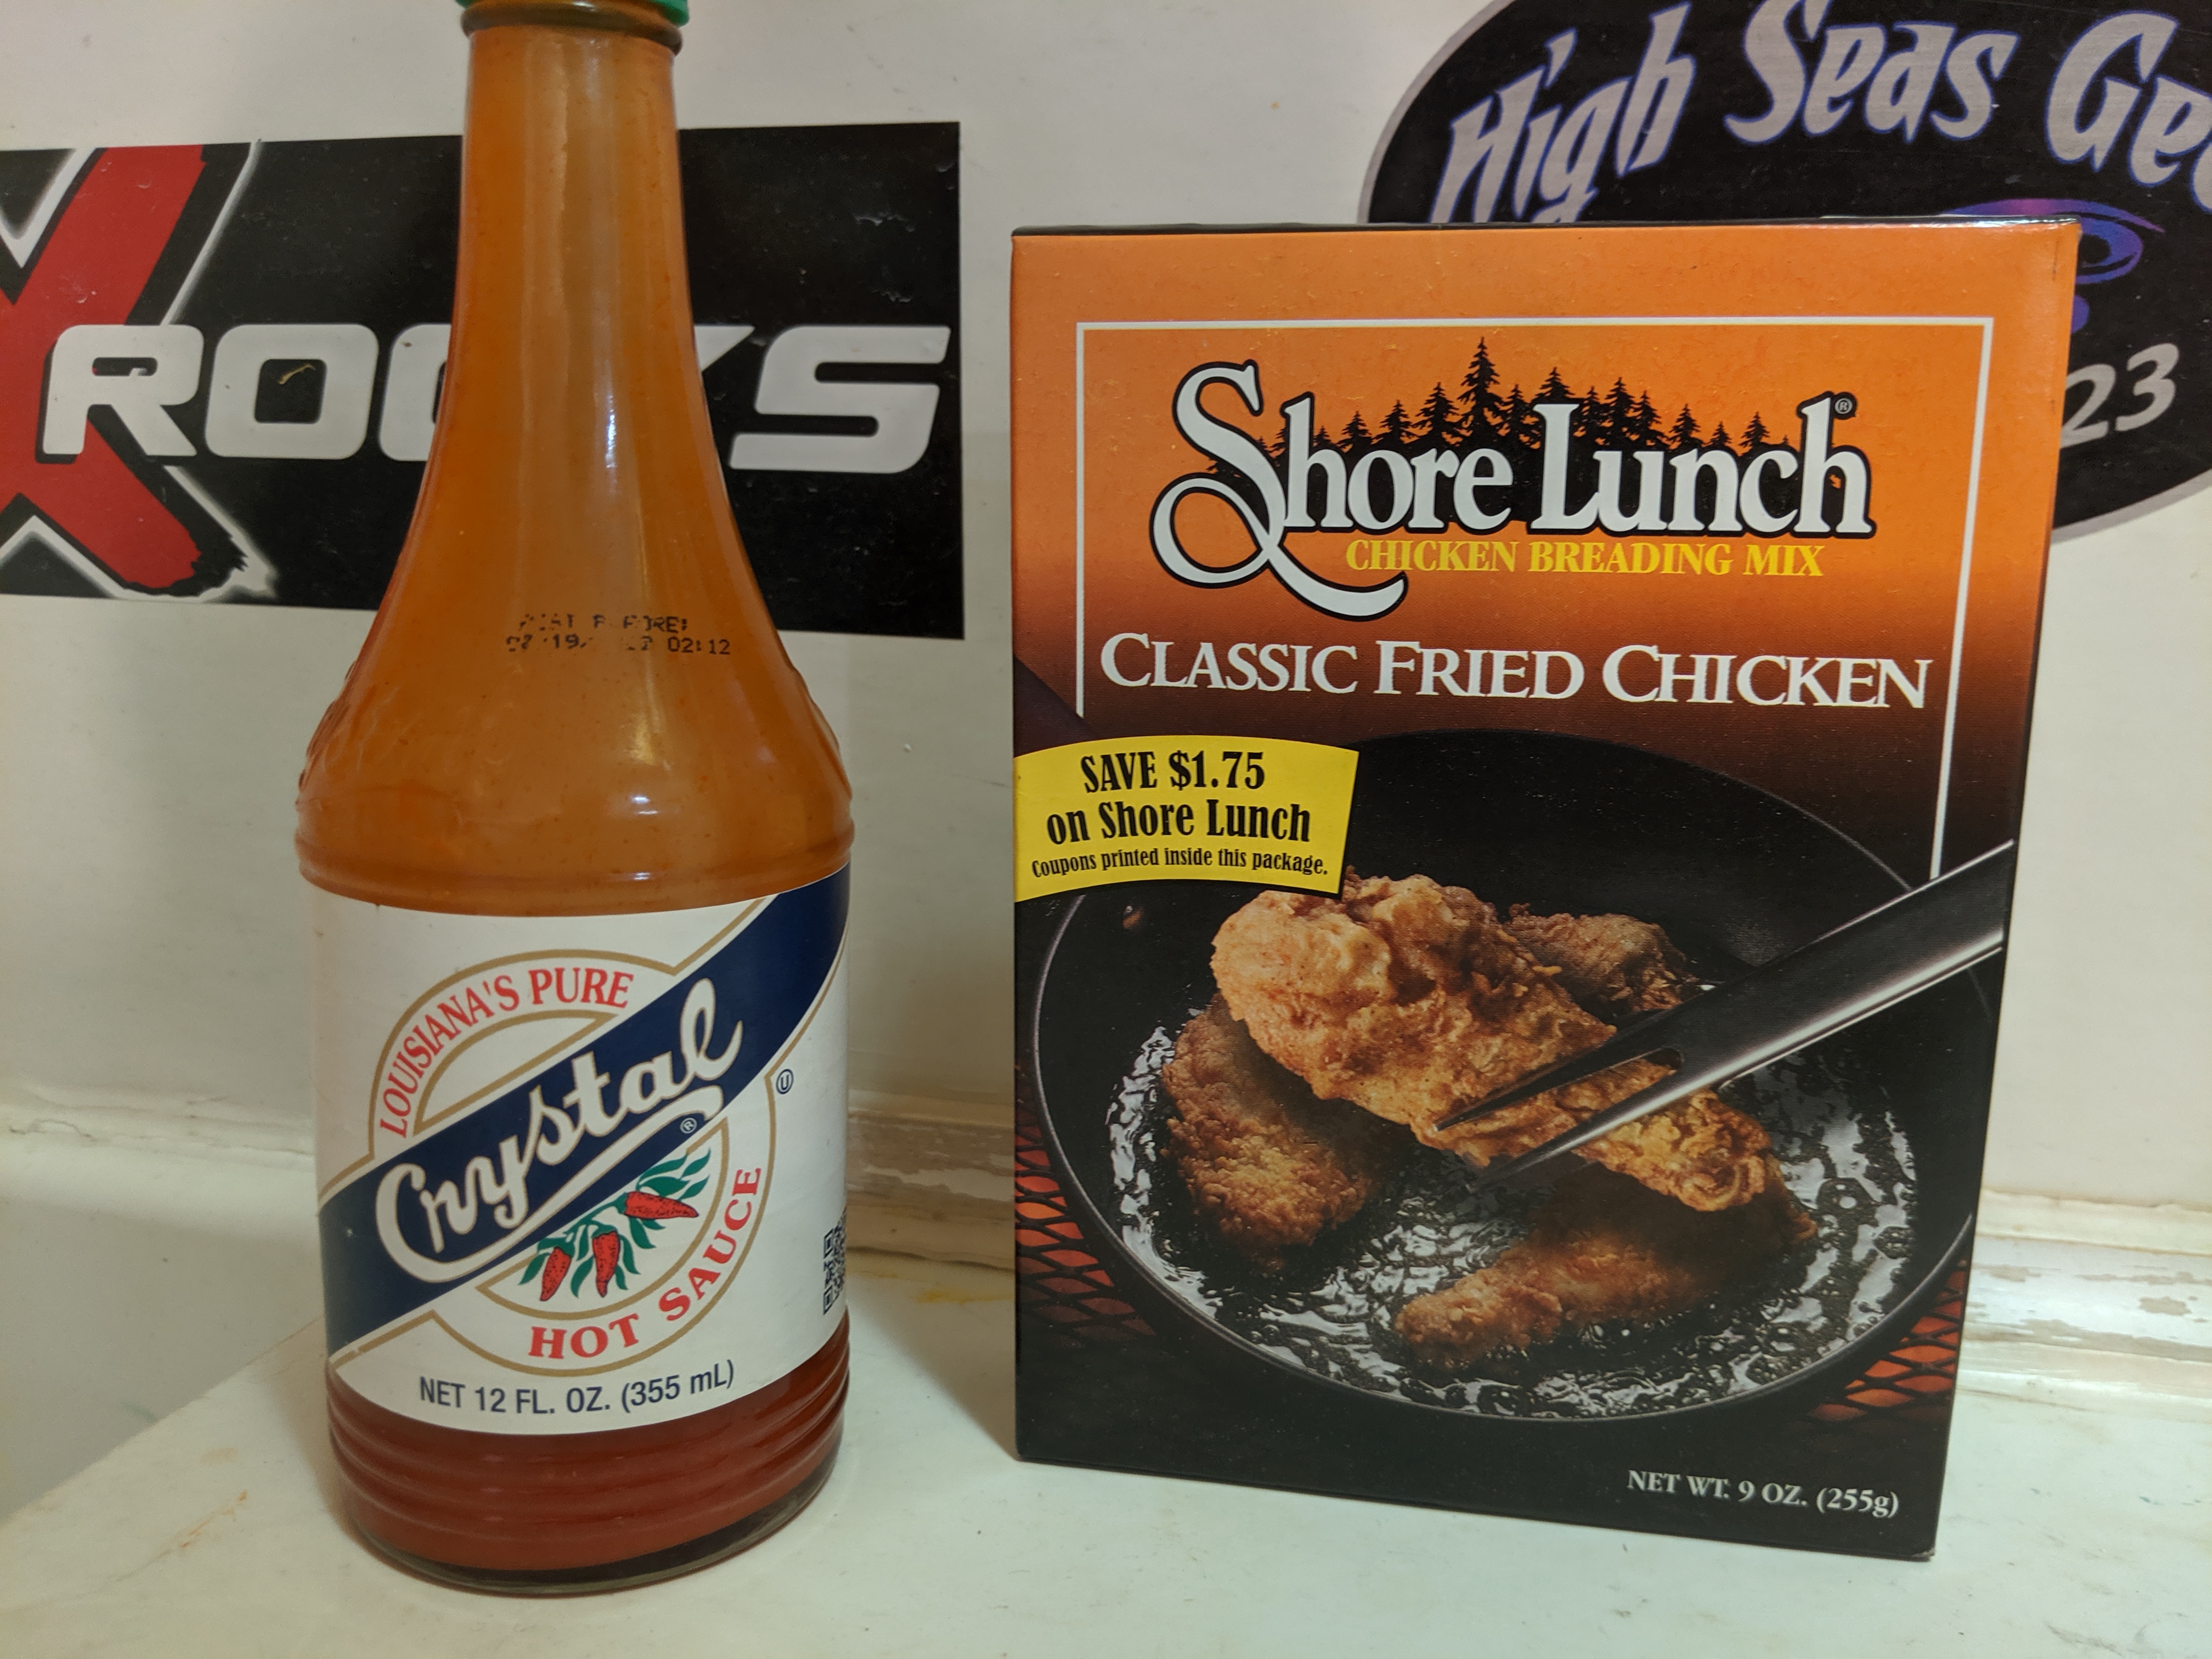 Classic Fried Chicken Breading Mix - Shore Lunch